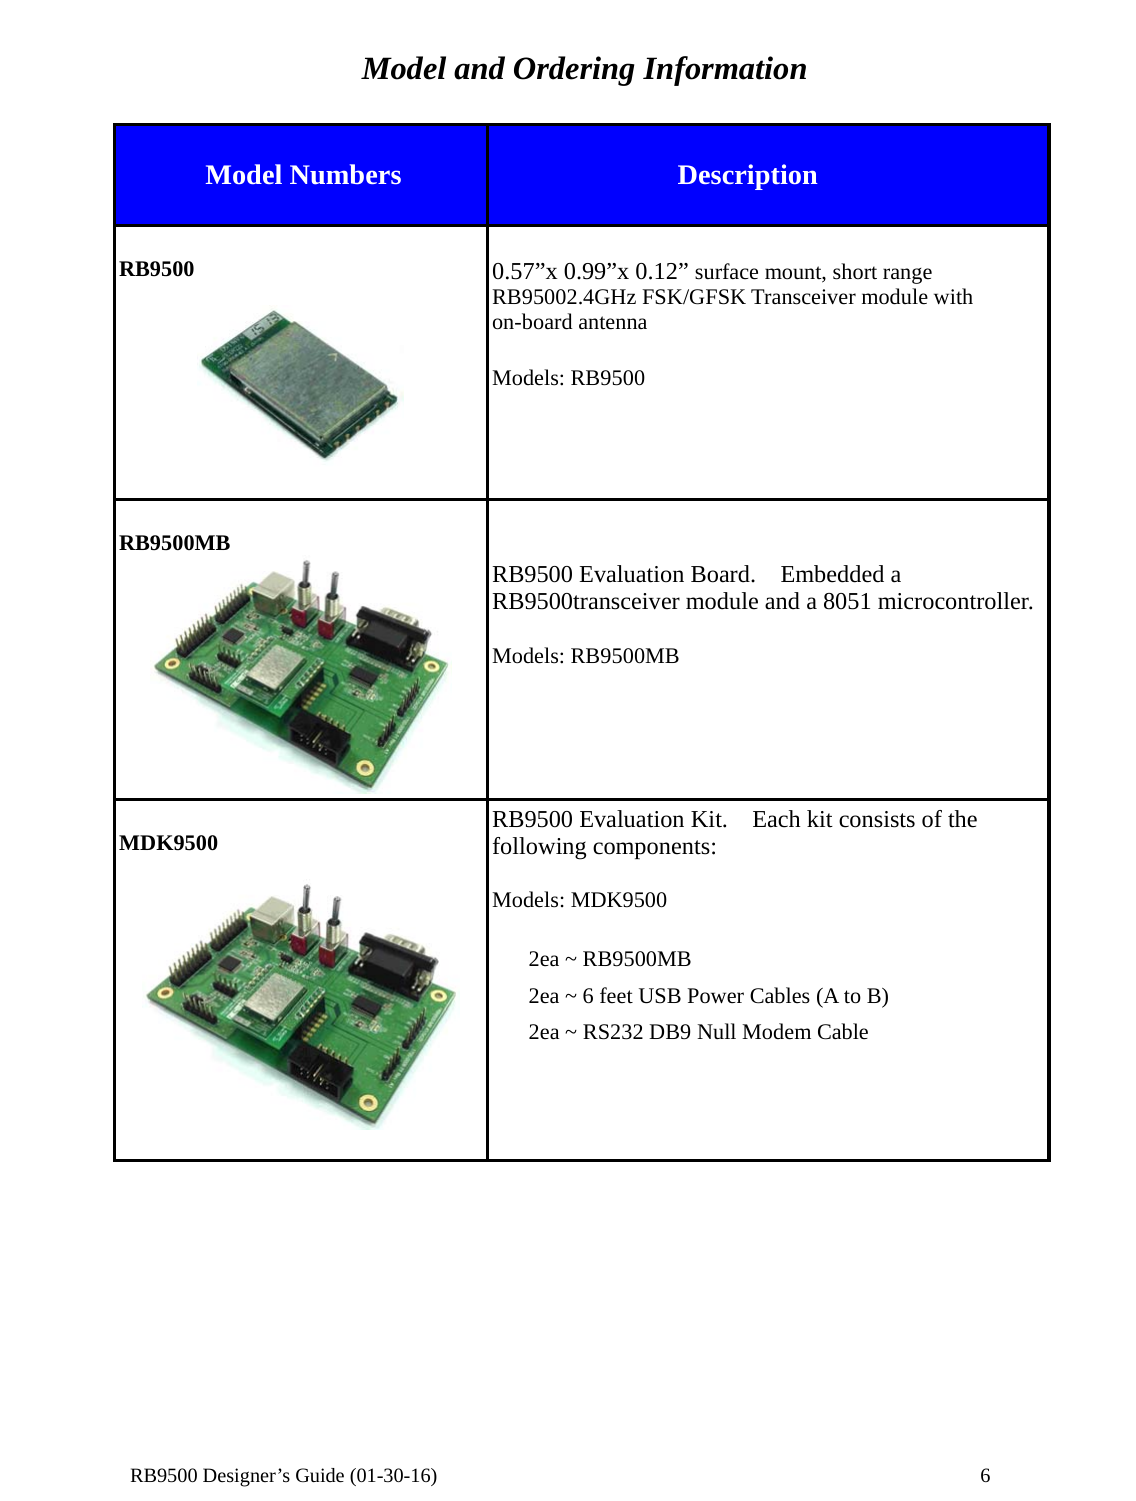  RB9500 Designer’s Guide (01-30-16)               6 Model and Ordering Information  Model Numbers  Description  RB9500   0.57”x 0.99”x 0.12” surface mount, short range RB95002.4GHz FSK/GFSK Transceiver module with on-board antenna  Models: RB9500  RB9500MB  RB9500 Evaluation Board.    Embedded a RB9500transceiver module and a 8051 microcontroller.Models: RB9500MB     MDK9500    RB9500 Evaluation Kit.    Each kit consists of the following components:  Models: MDK9500   2ea ~ RB9500MB   2ea ~ 6 feet USB Power Cables (A to B)   2ea ~ RS232 DB9 Null Modem Cable       